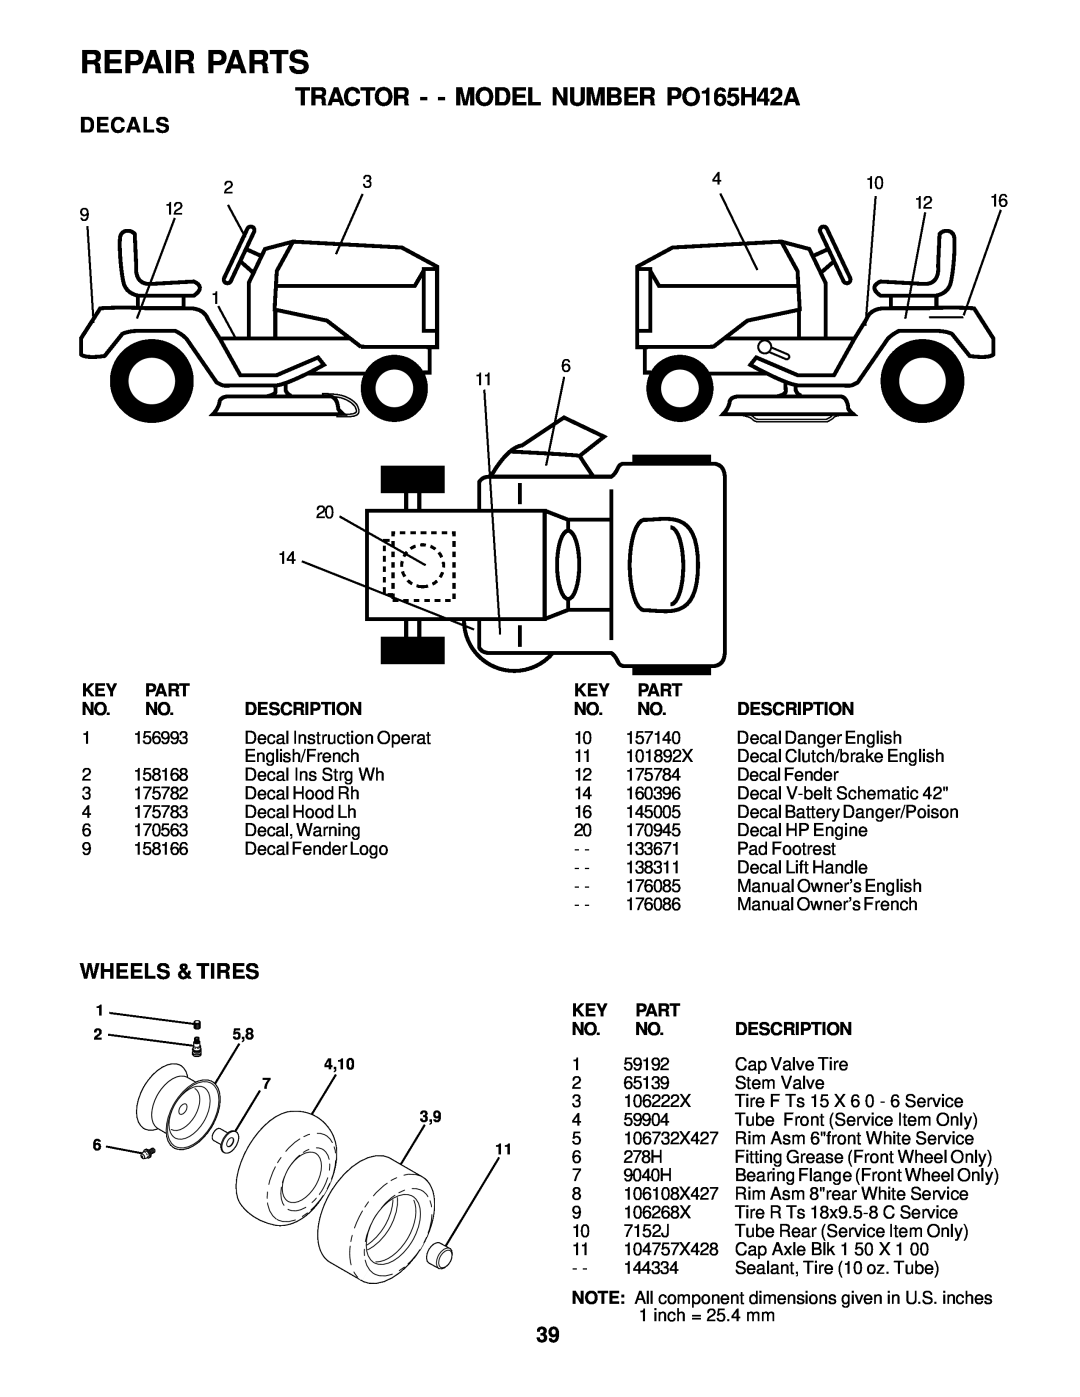 Poulan 176085 owner manual Decals, Wheels & Tires, Repair Parts, TRACTOR - - MODEL NUMBER PO165H42A, 4,10 